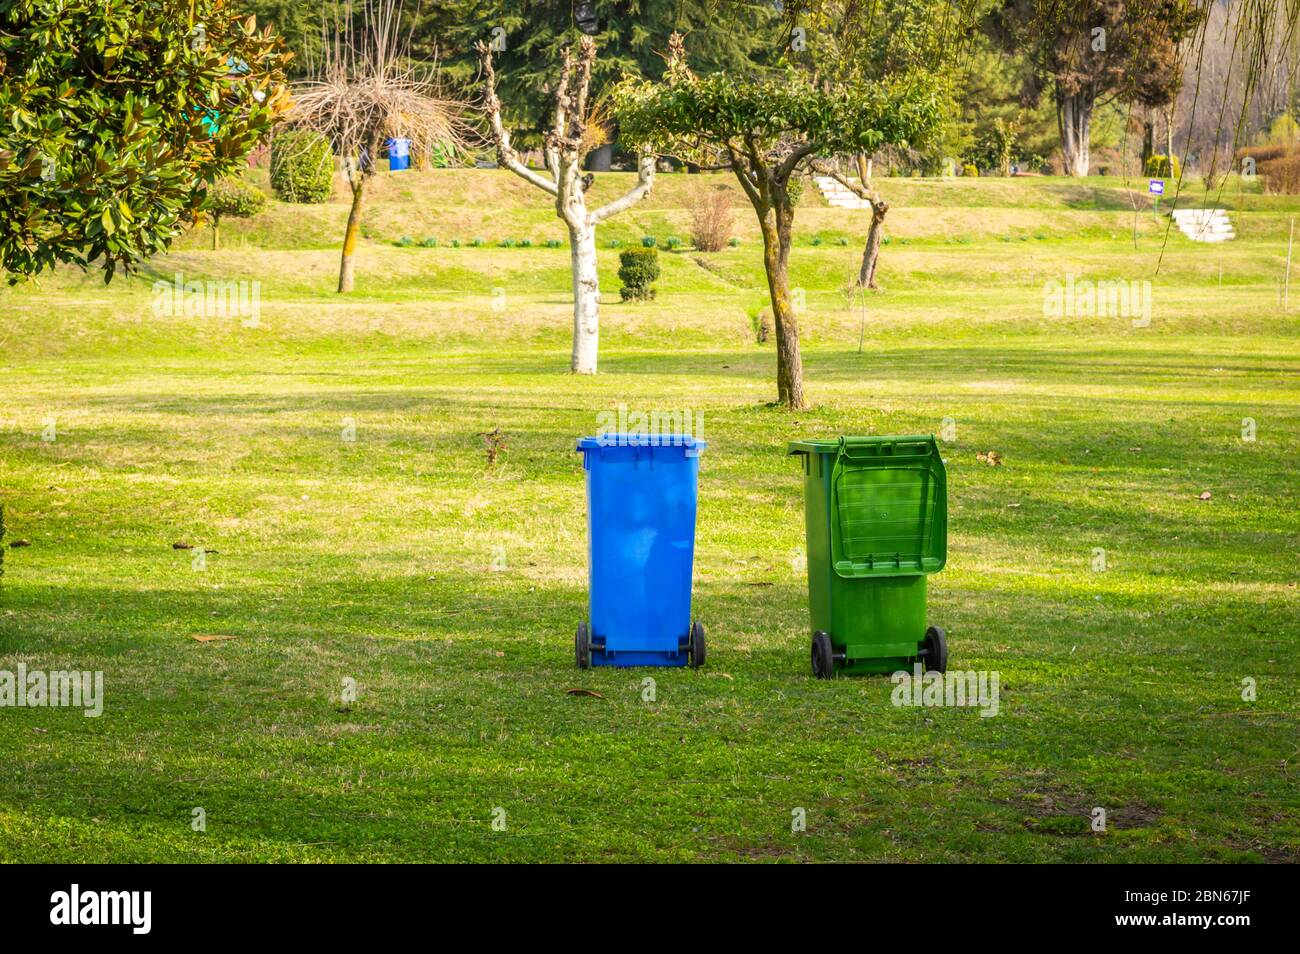 Trash bins for waste collection and segregation at a public park in India Stock Photo